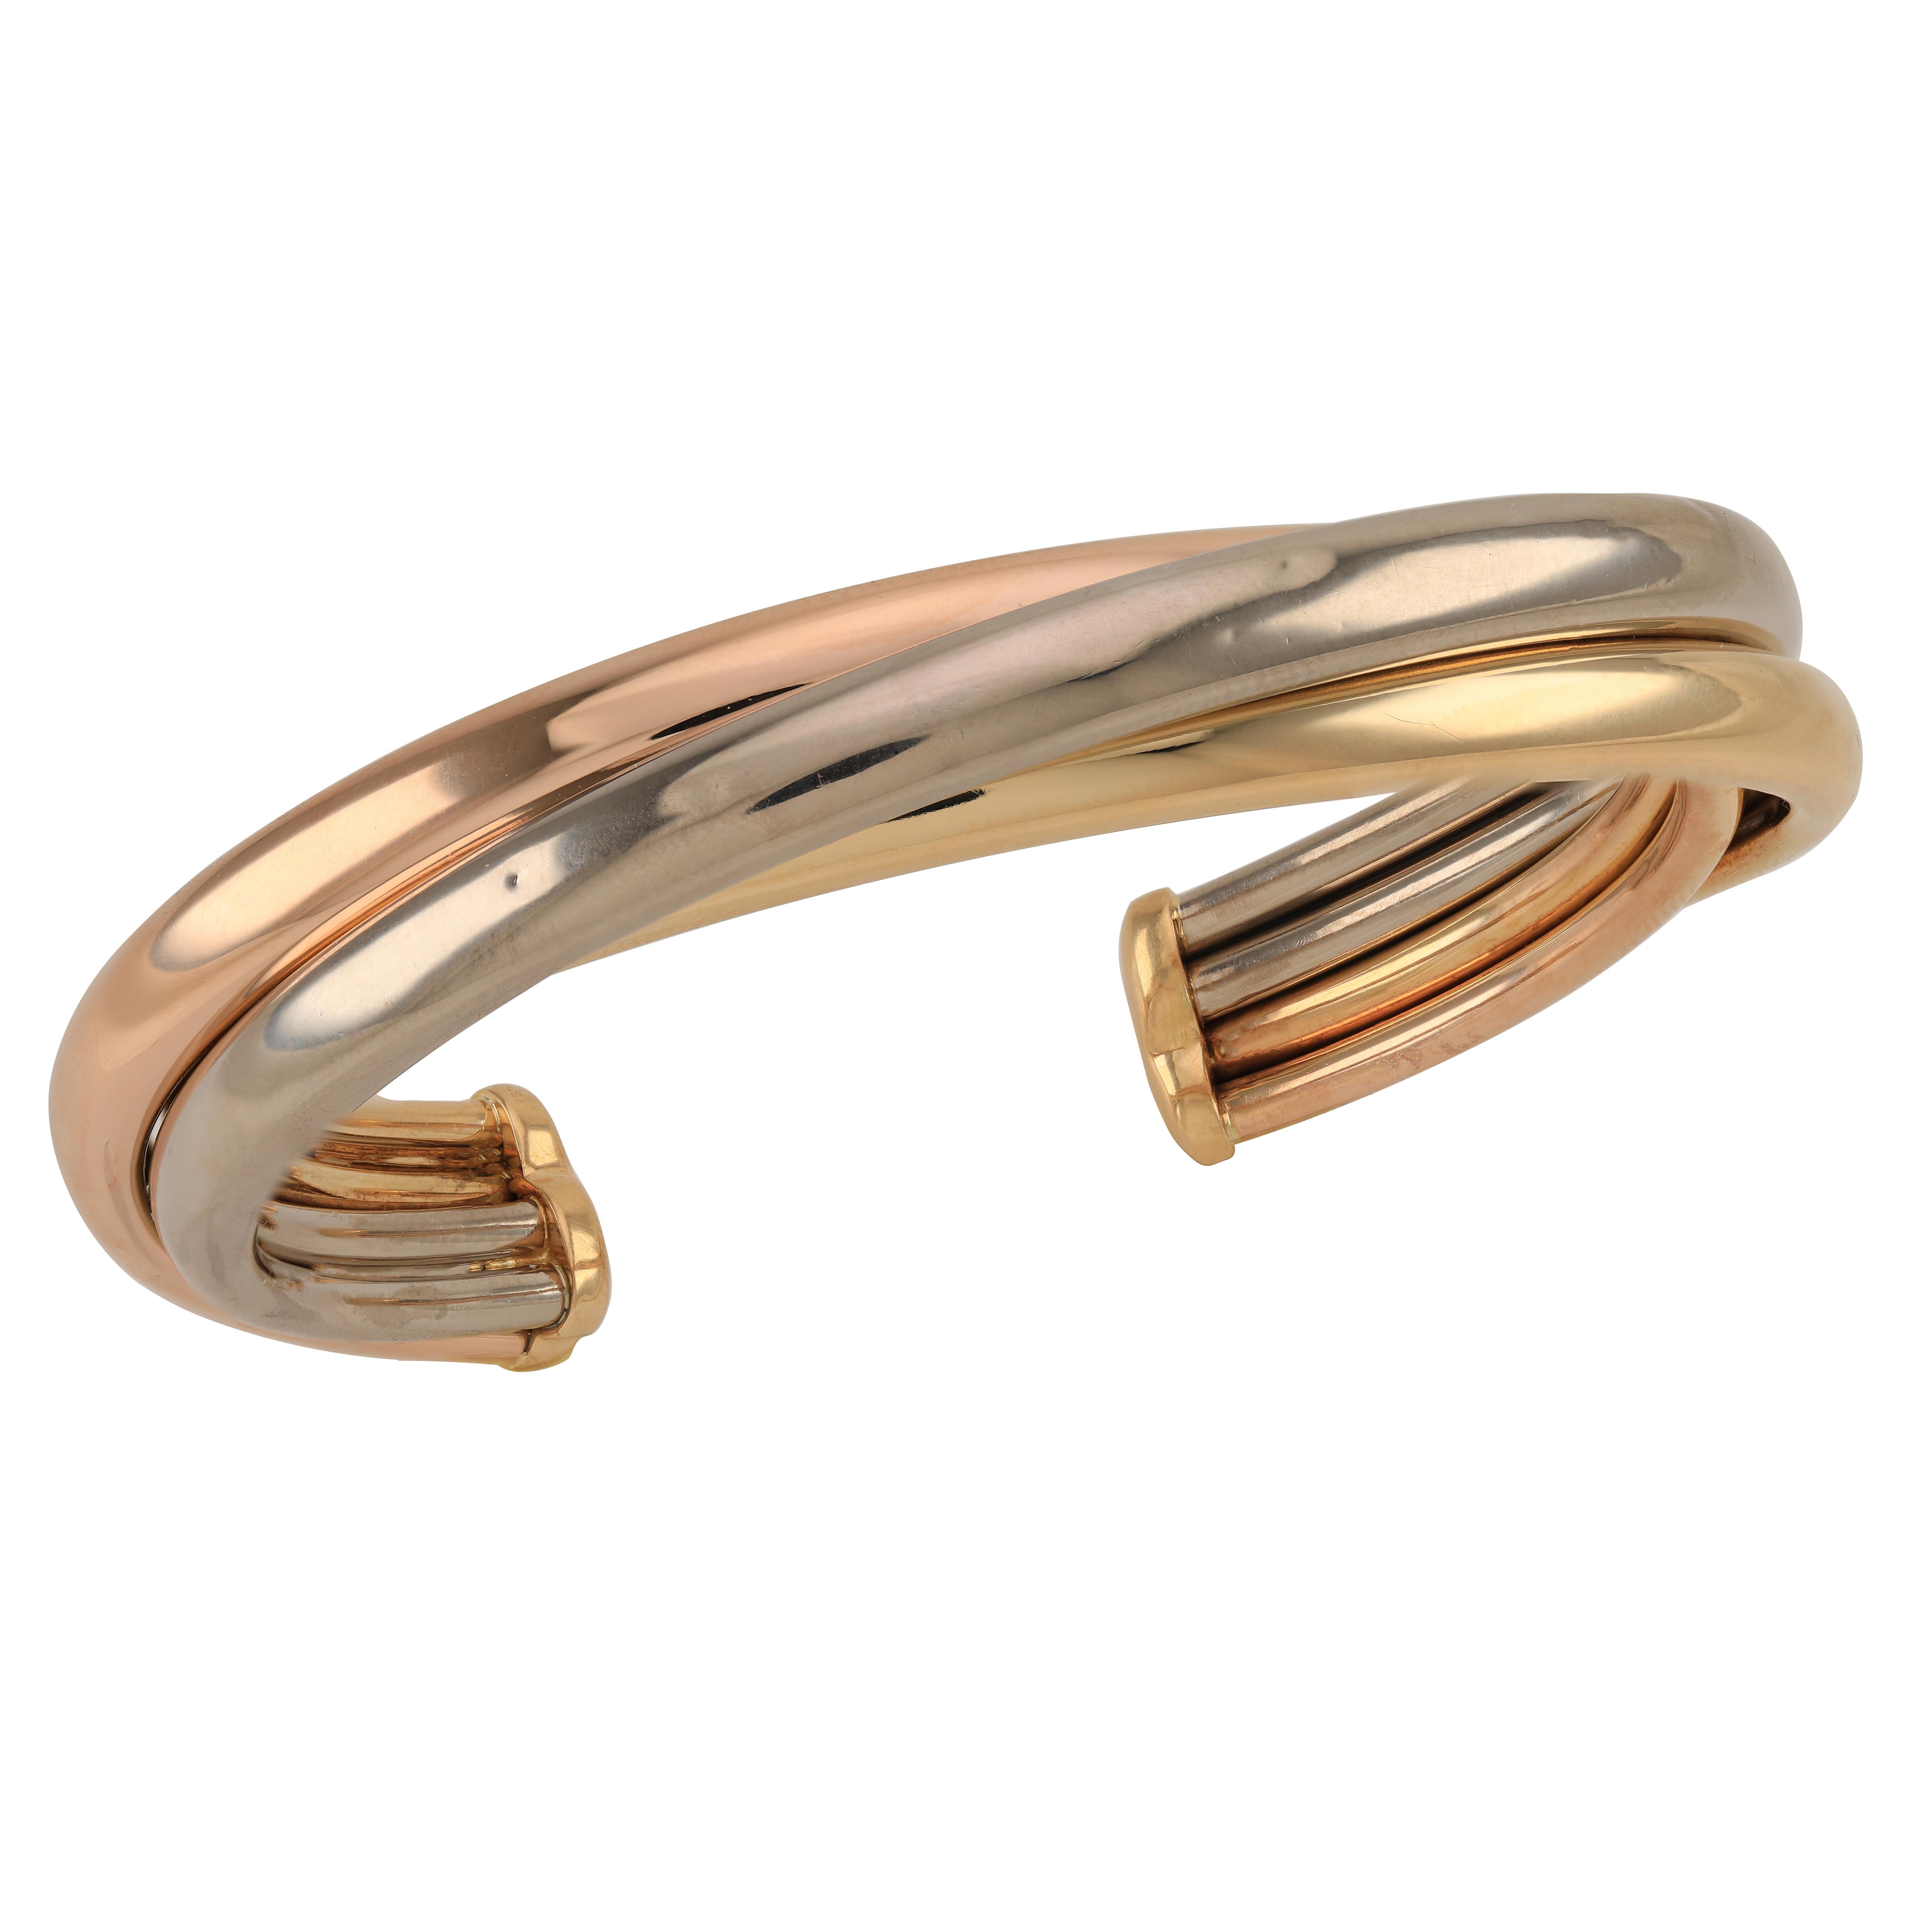 Cartier Trinity 18k Yellow White and Rose Gold Cuff Bangle Bracelet
Cartier, Circa 1992, wonderful Trinity cuff bangle bracelet made of 18k White, Yellow, Rose Gold. The beautiful bracelet is full of class, smooth and sleek twists are intertwined